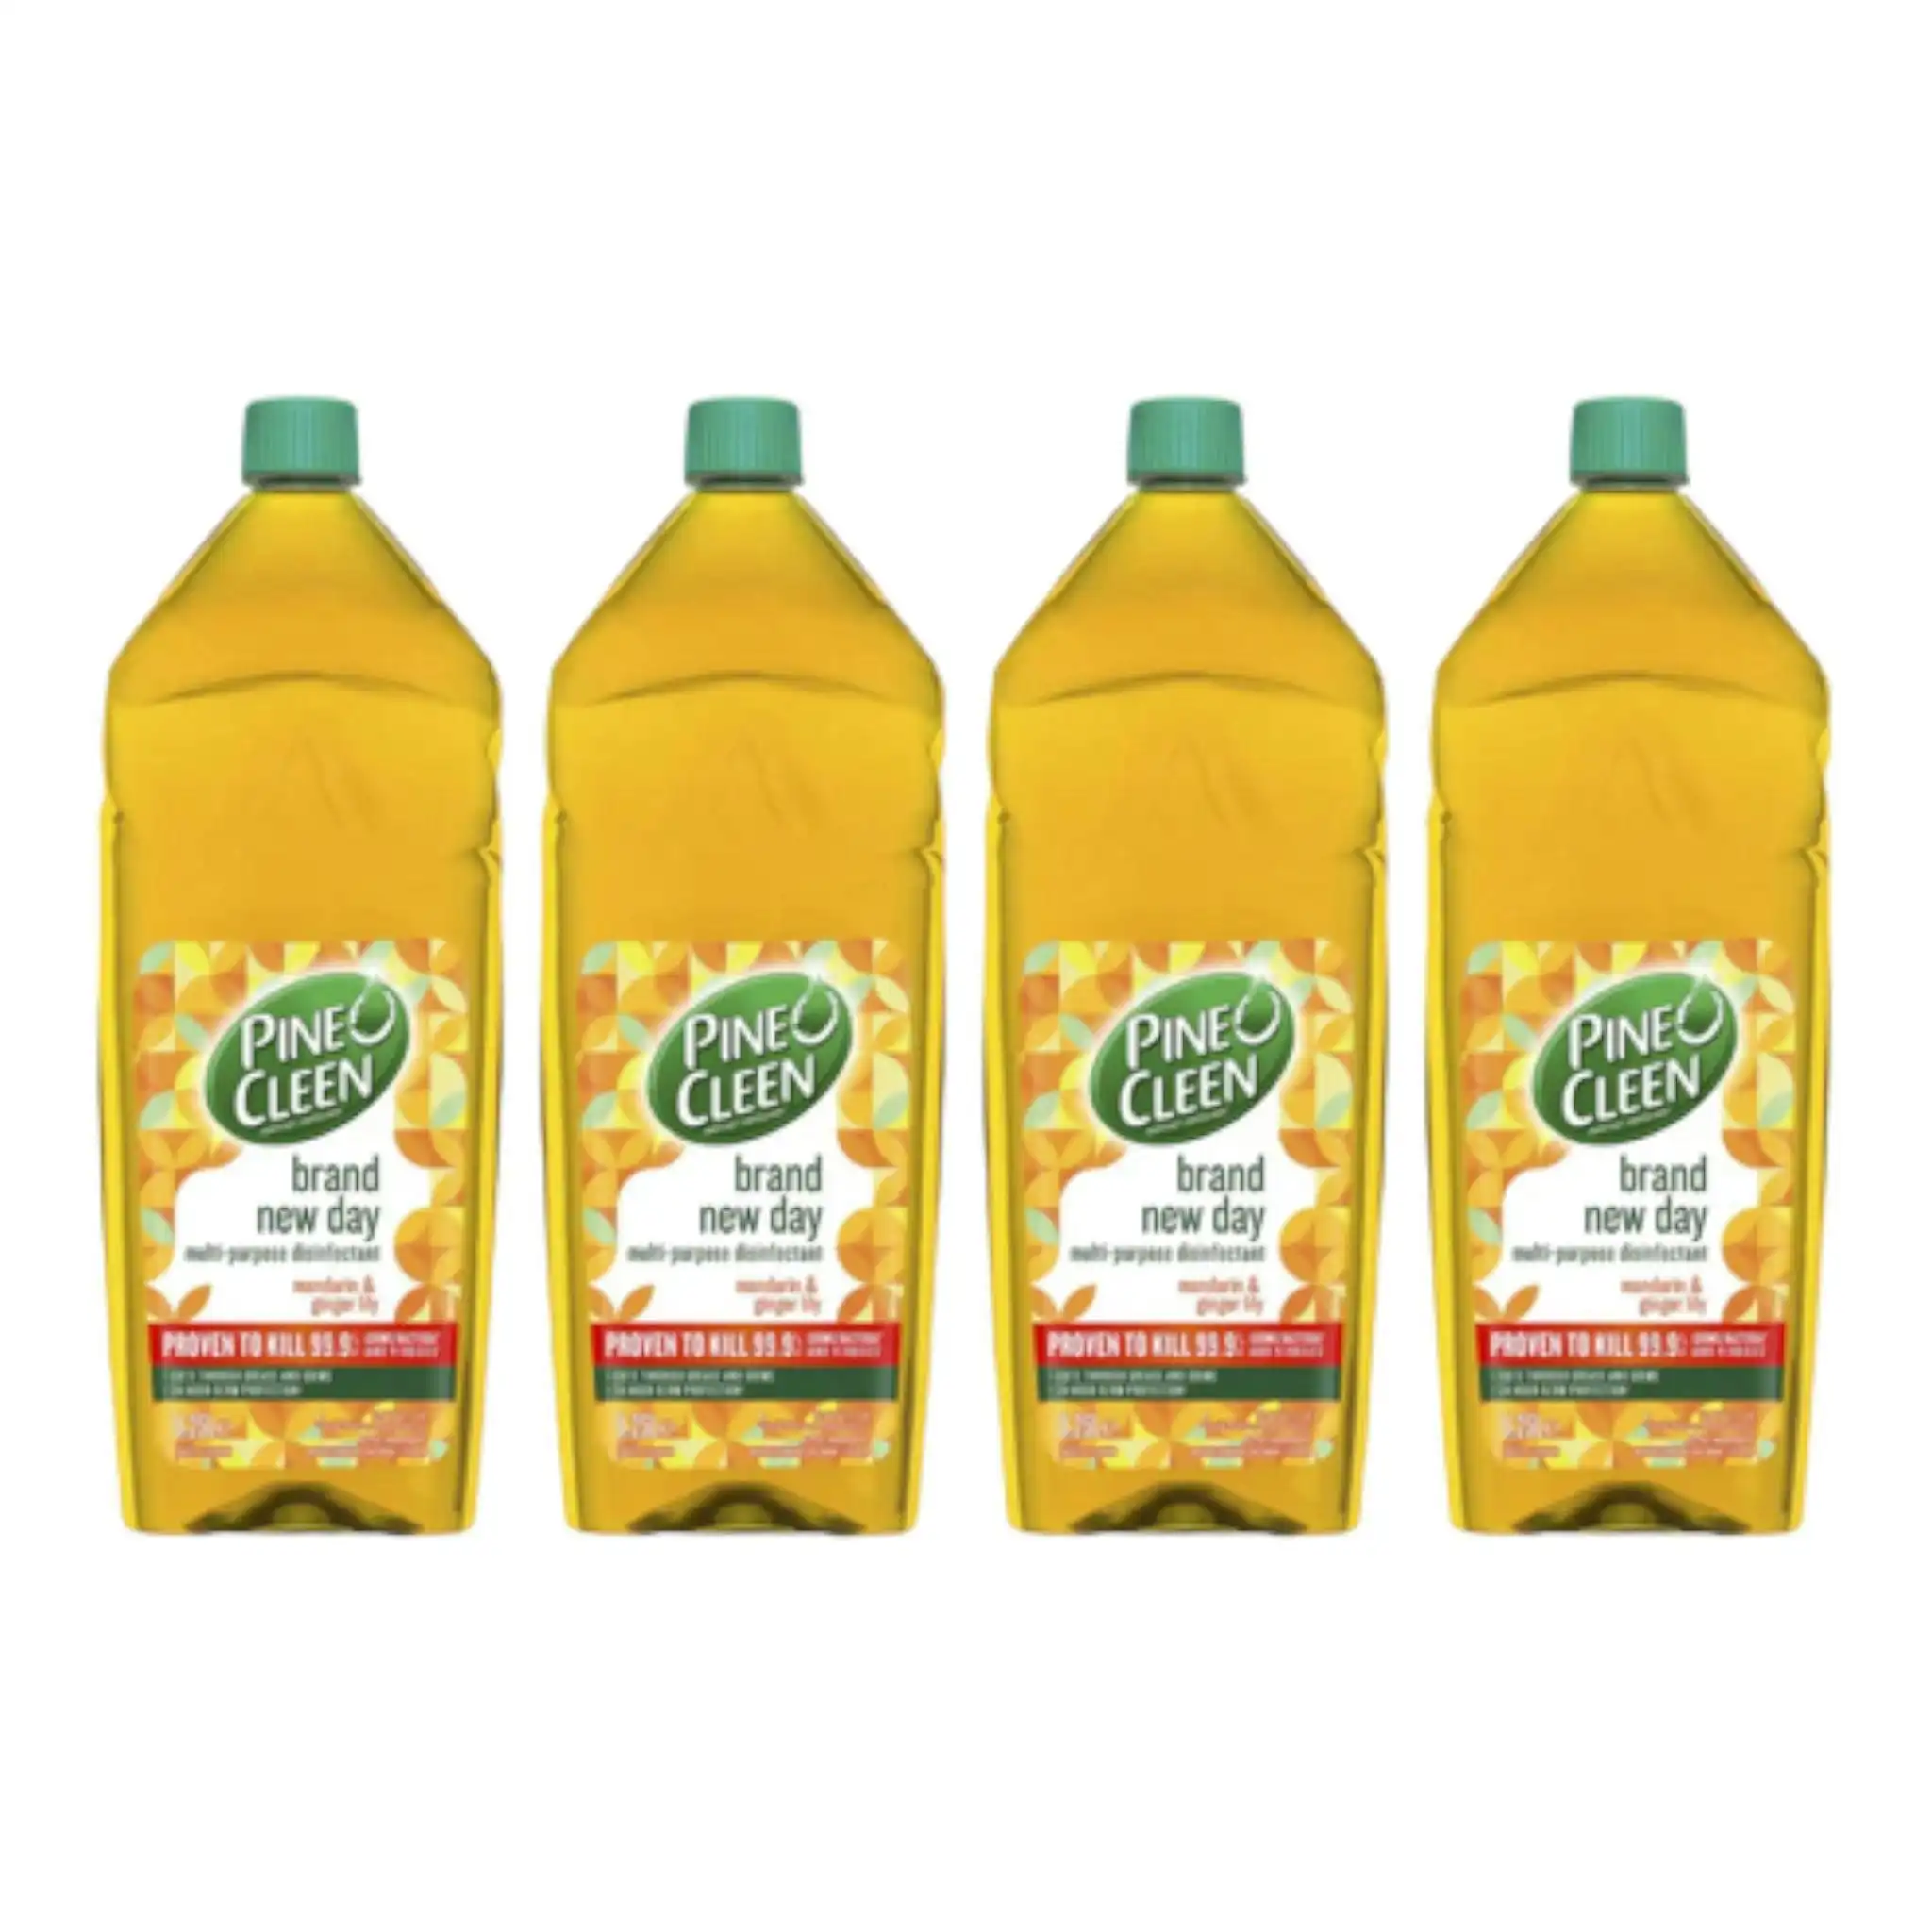 4 Pack Pine O Cleen Disinfectant Brand New Day Mandarin & Ginger lily 1.25l